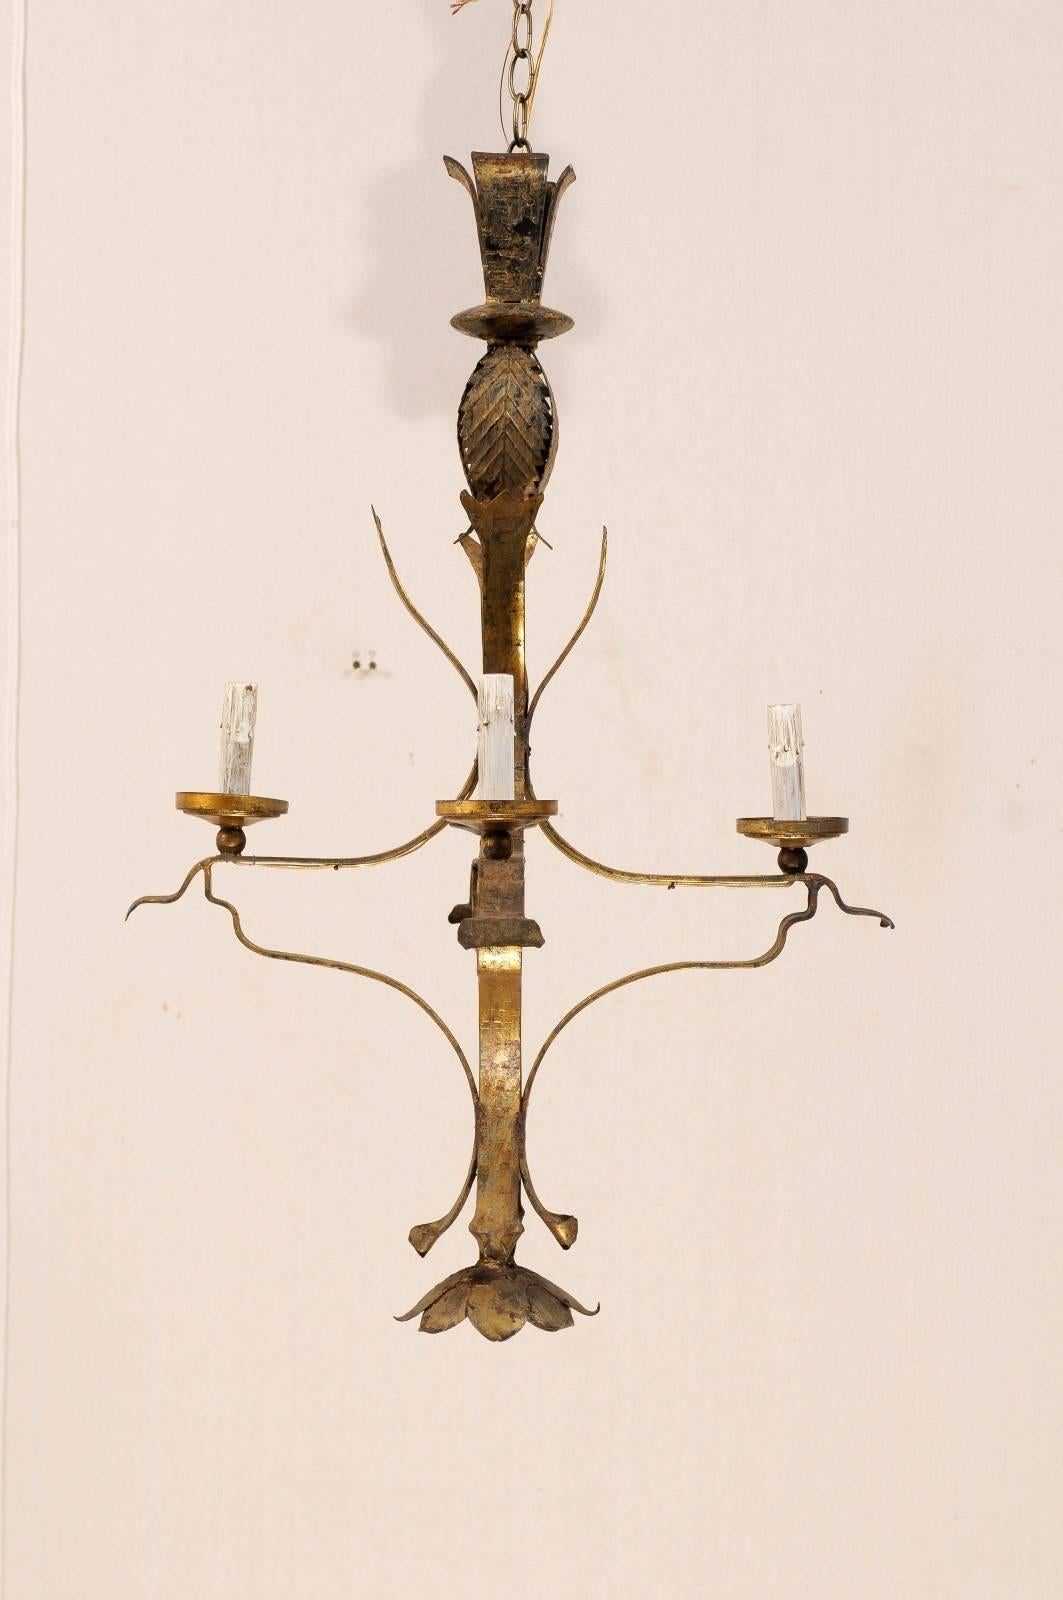 20th Century A French Vintage Gilt Iron Four-Light Chandelier with Floral Motif Finial